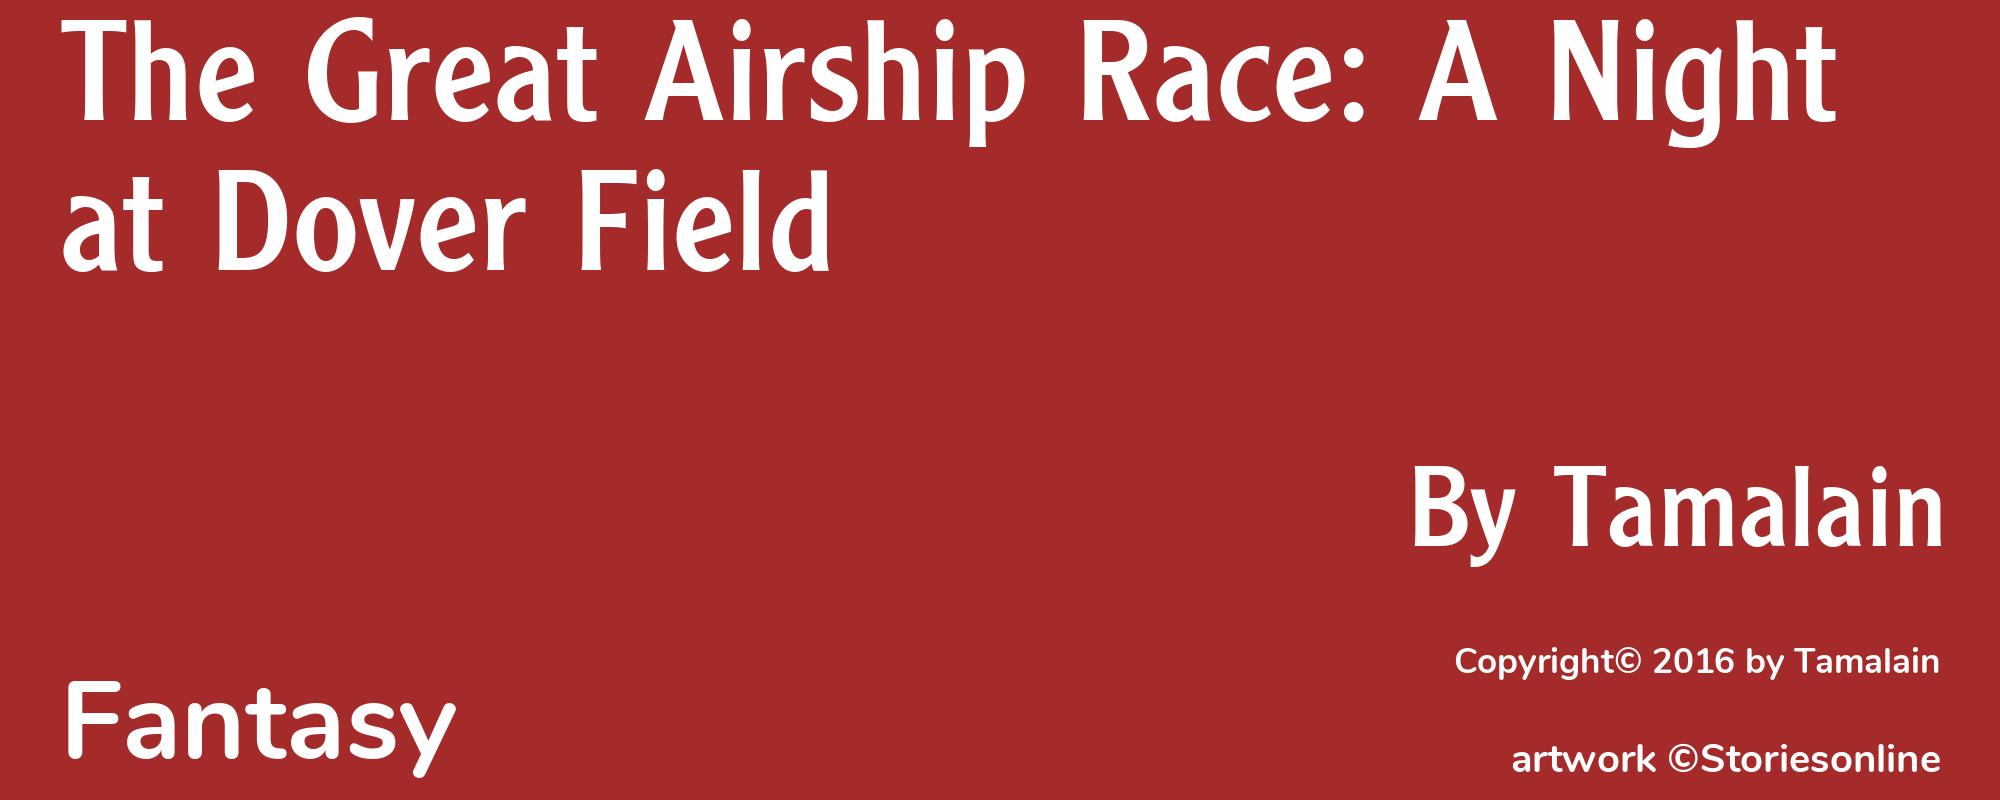 The Great Airship Race: A Night at Dover Field - Cover